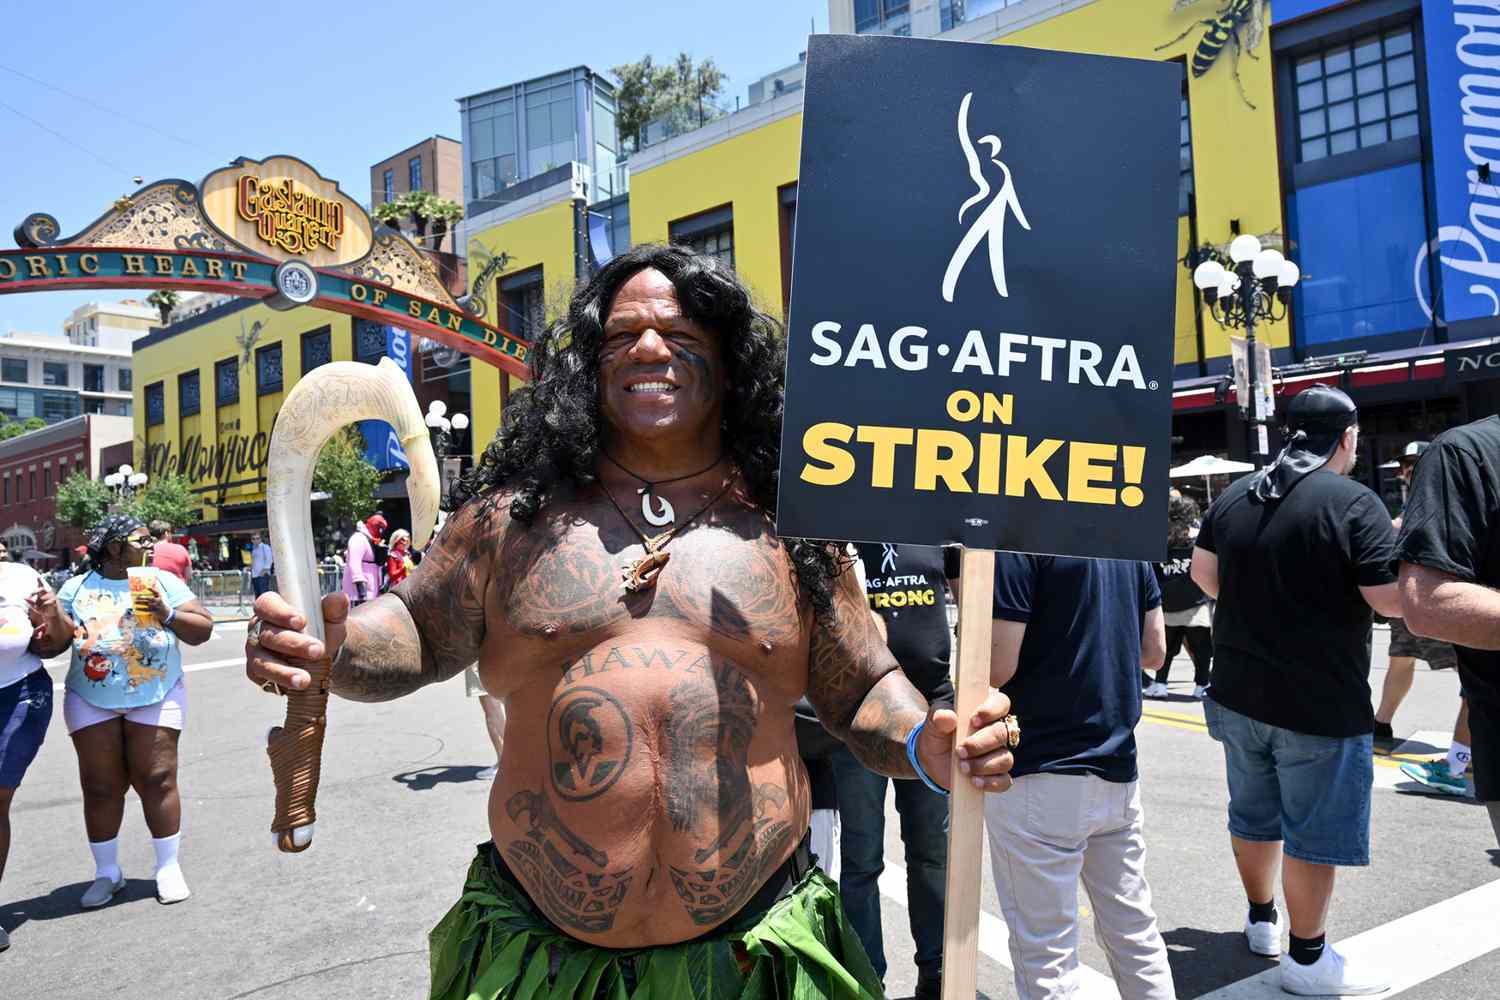 Cosplayer Darrell Waterford dressed as Maui from "Moana" protests alongside members of SAG-AFTRA at 2023 Comic-Con in San Diego